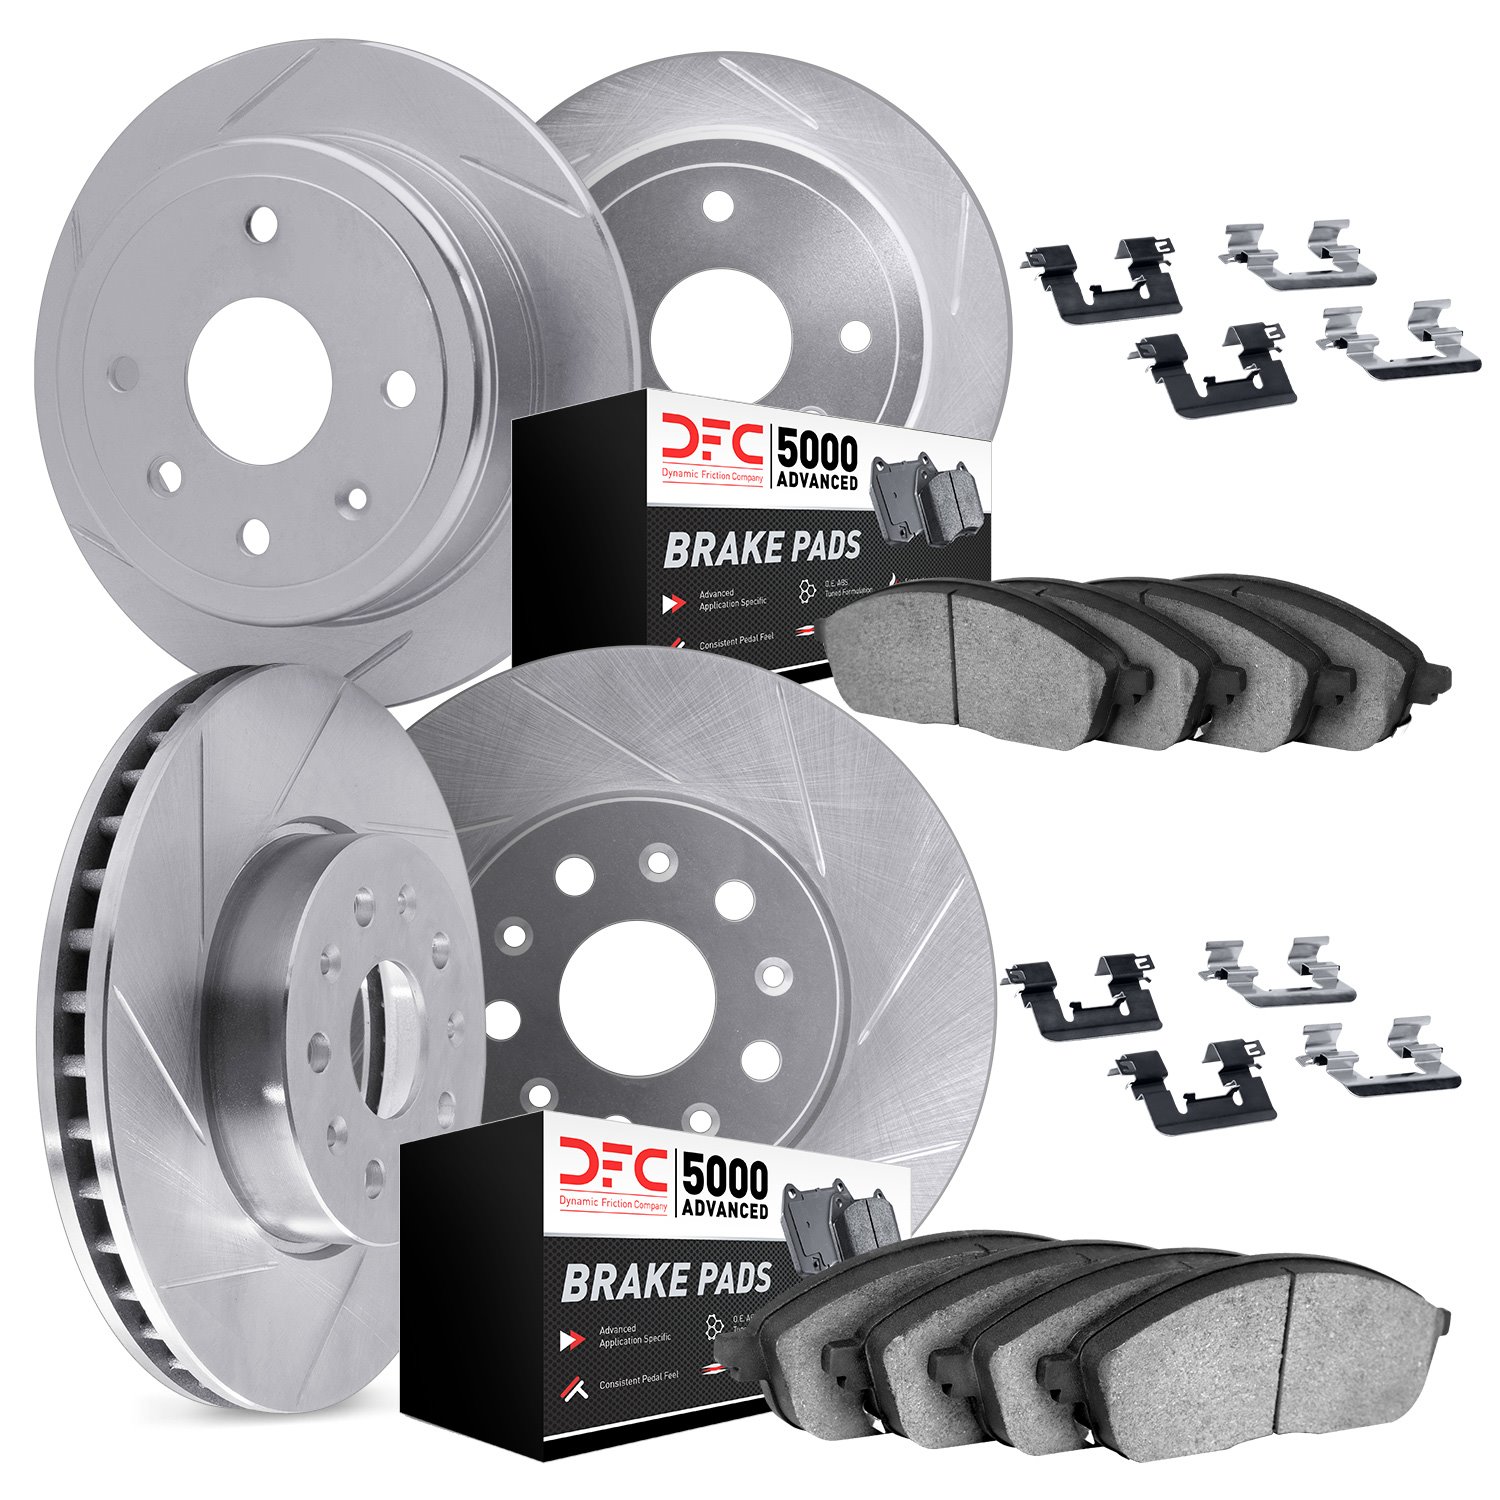 5514-42007 Slotted Brake Rotors w/5000 Advanced Brake Pads Kit & Hardware [Silver], 2005-2010 Mopar, Position: Front and Rear